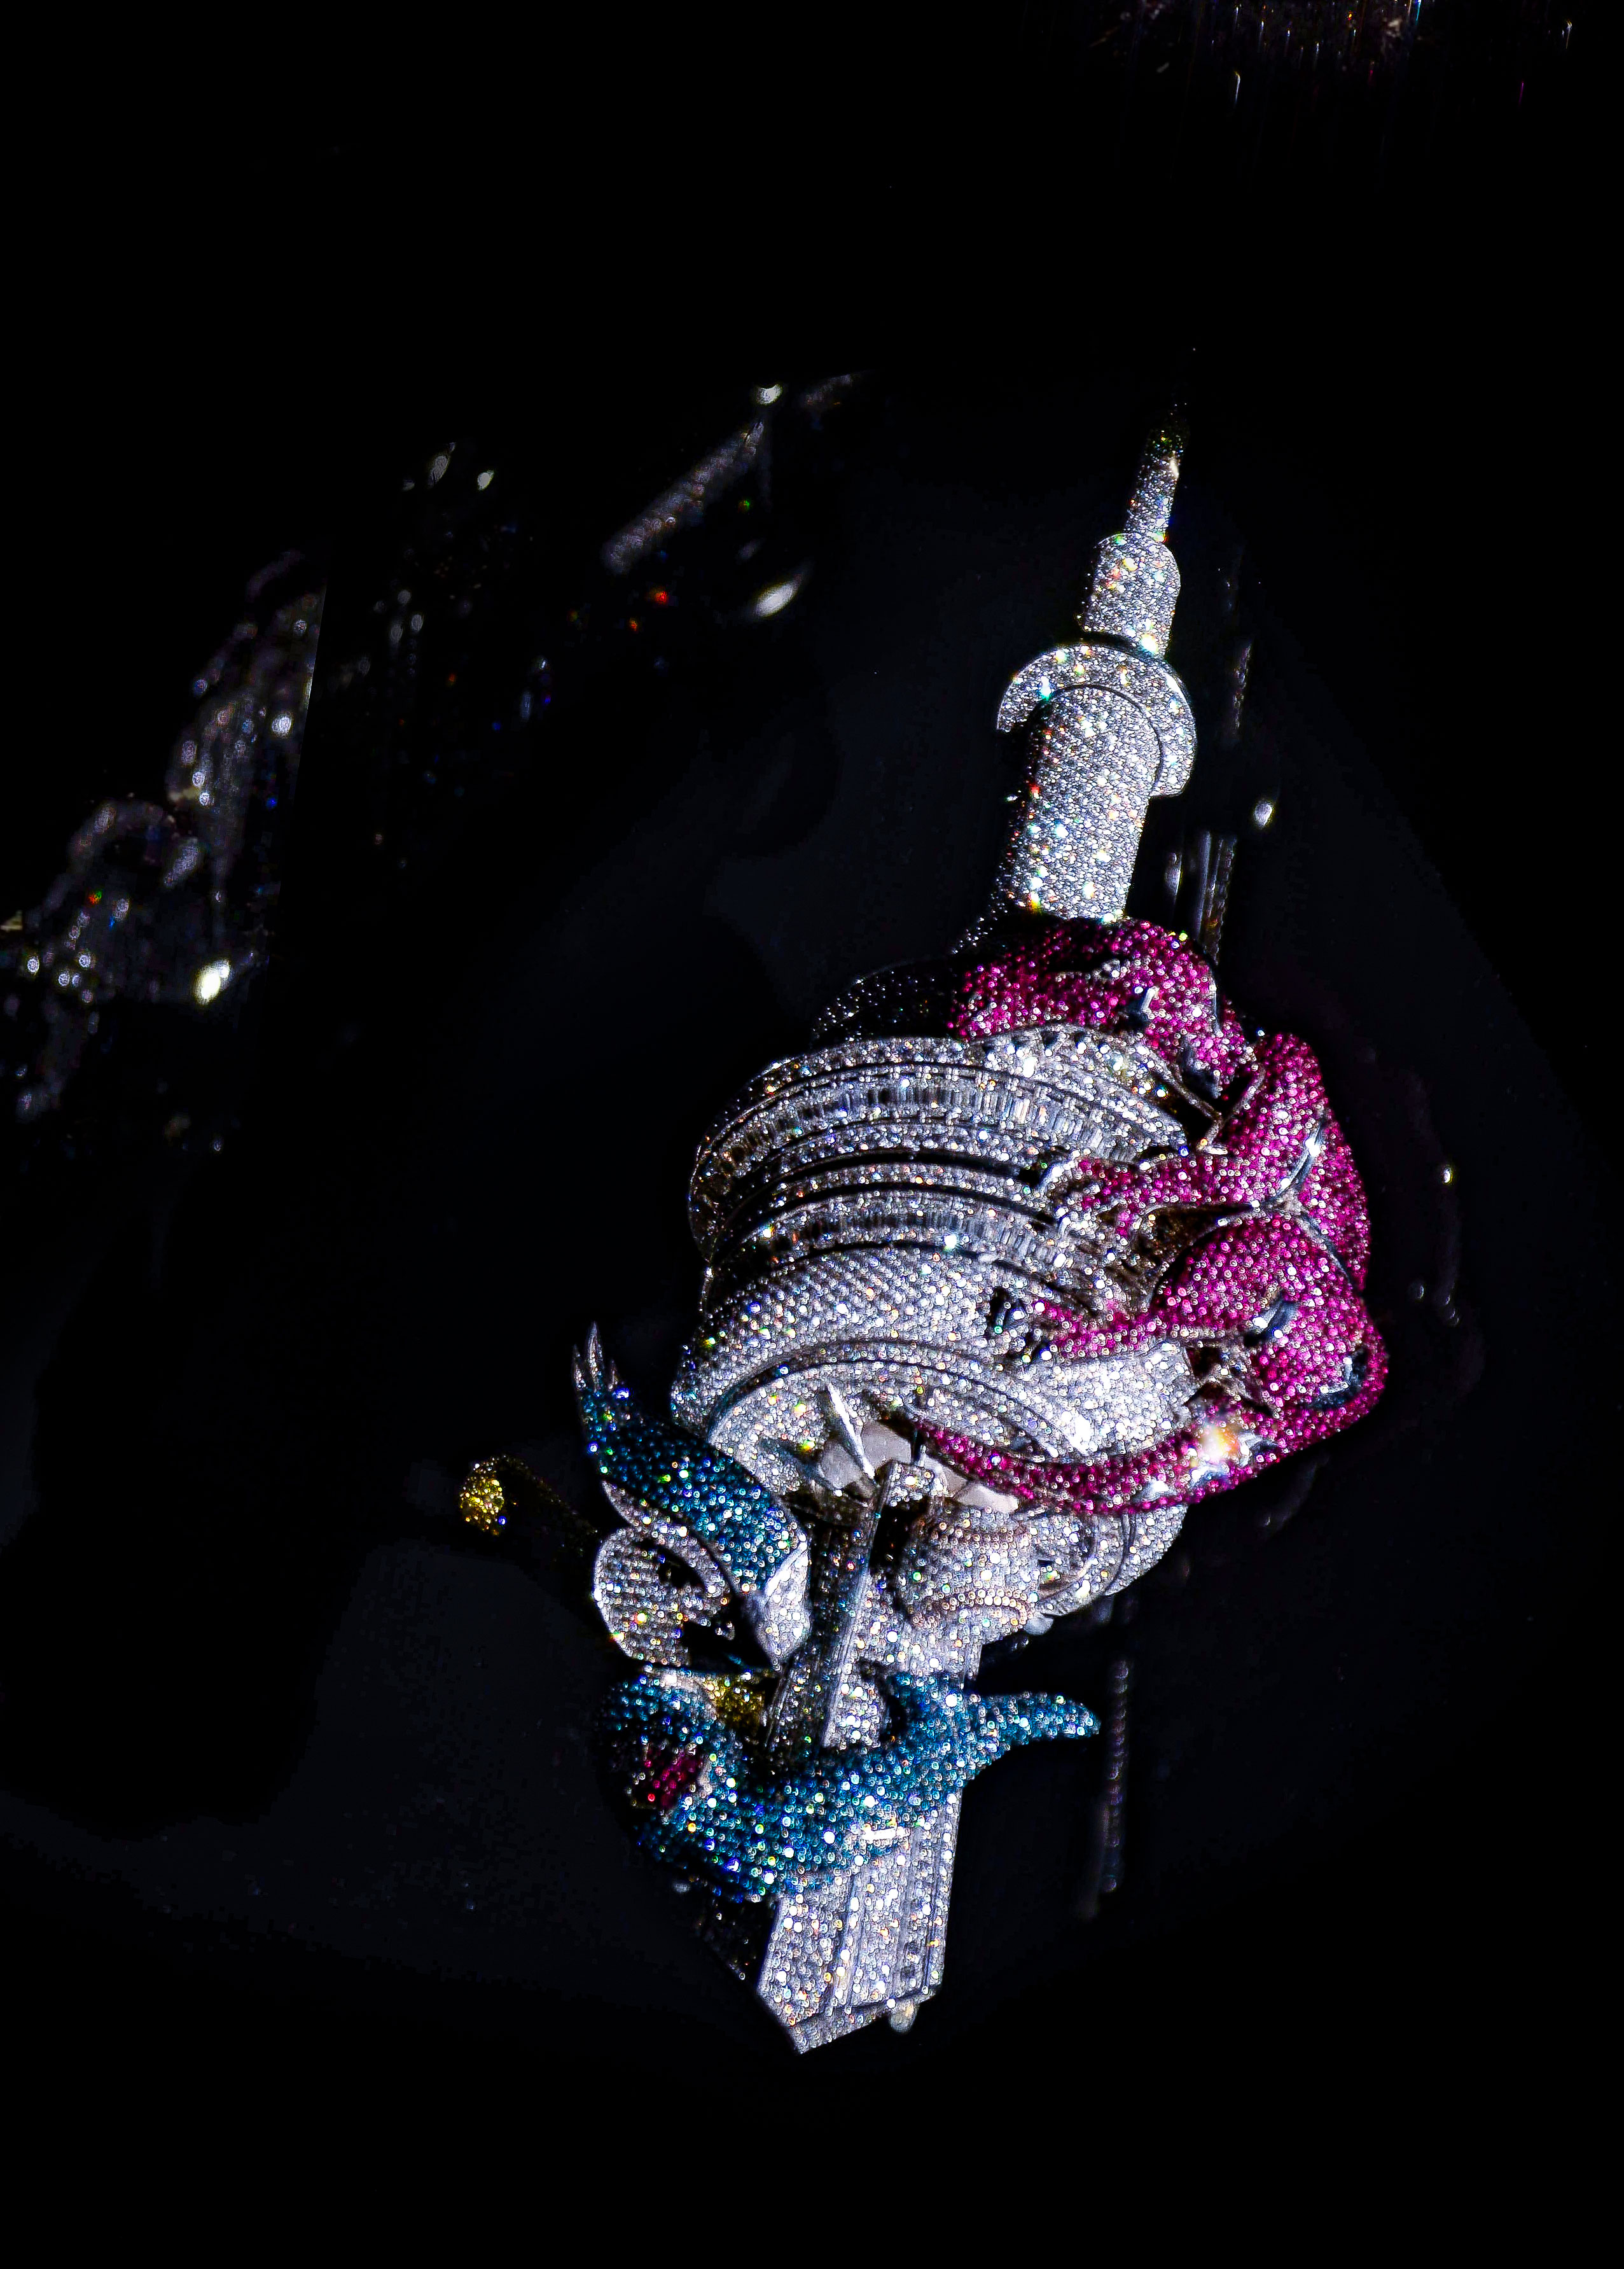 hip-hop bling is the thing at a luminous new jewelry exhibit